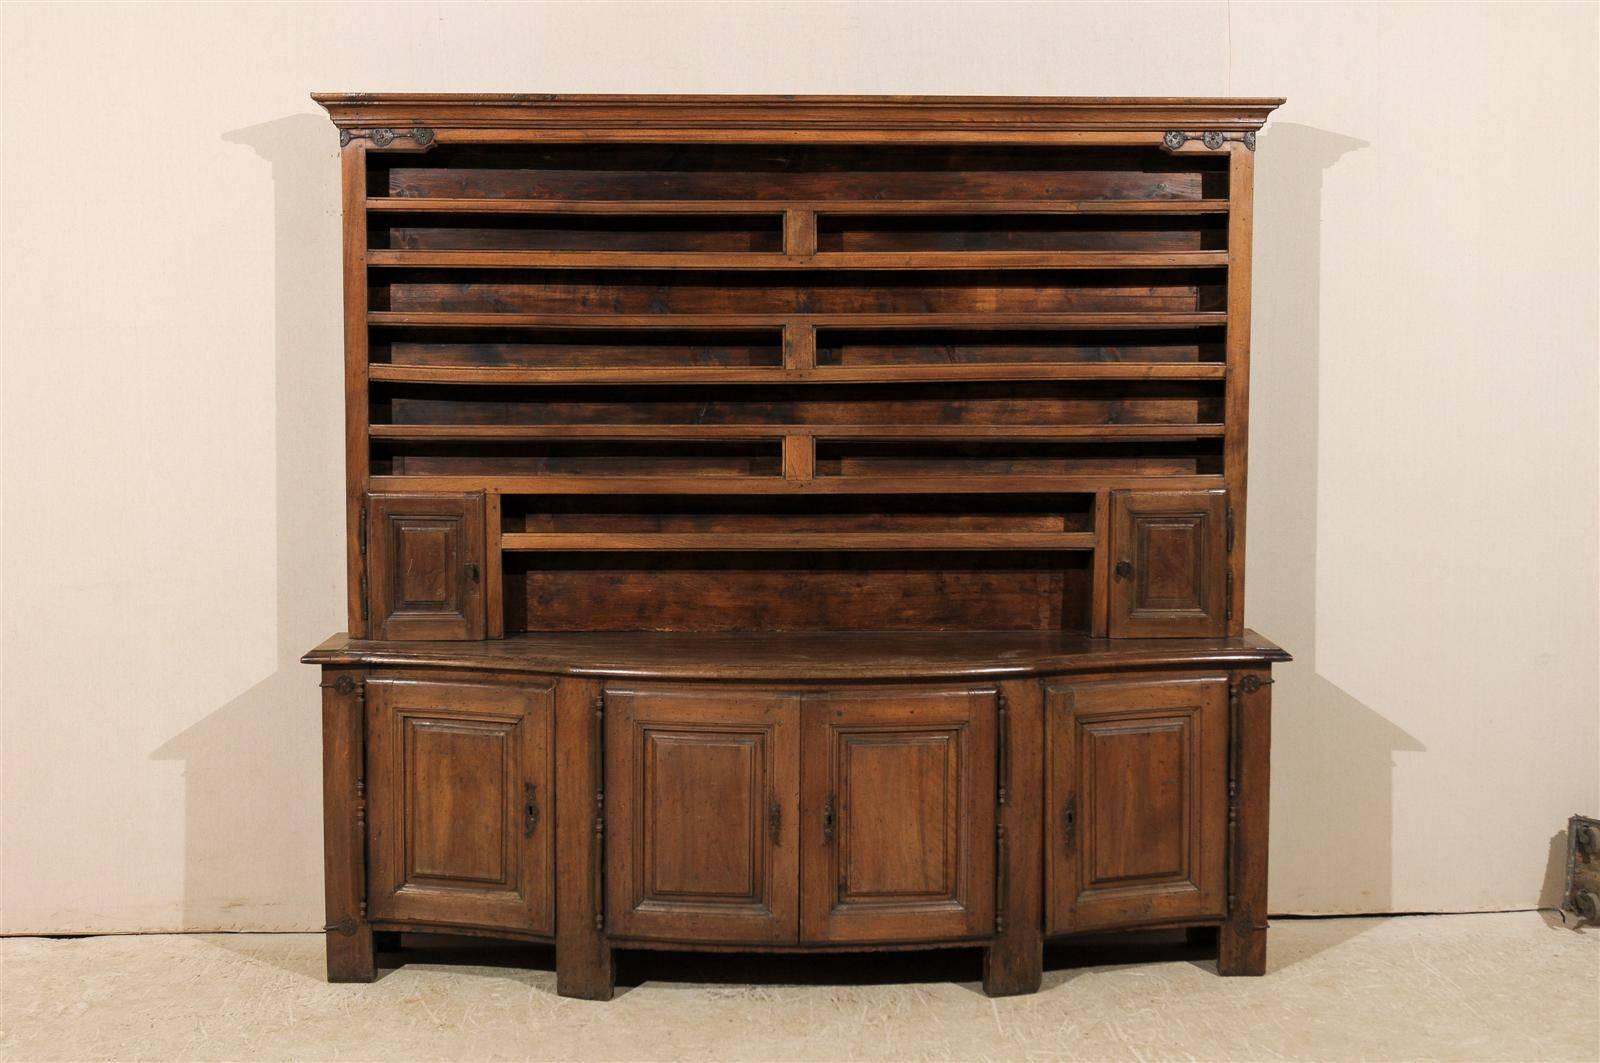 A 19th century English large size wood vaisselier / display and storage cabinet with bowed front section. This vaisselier features a top with open shelving, flanked by two small doors at the bottom section, which rests atop the lower half of the